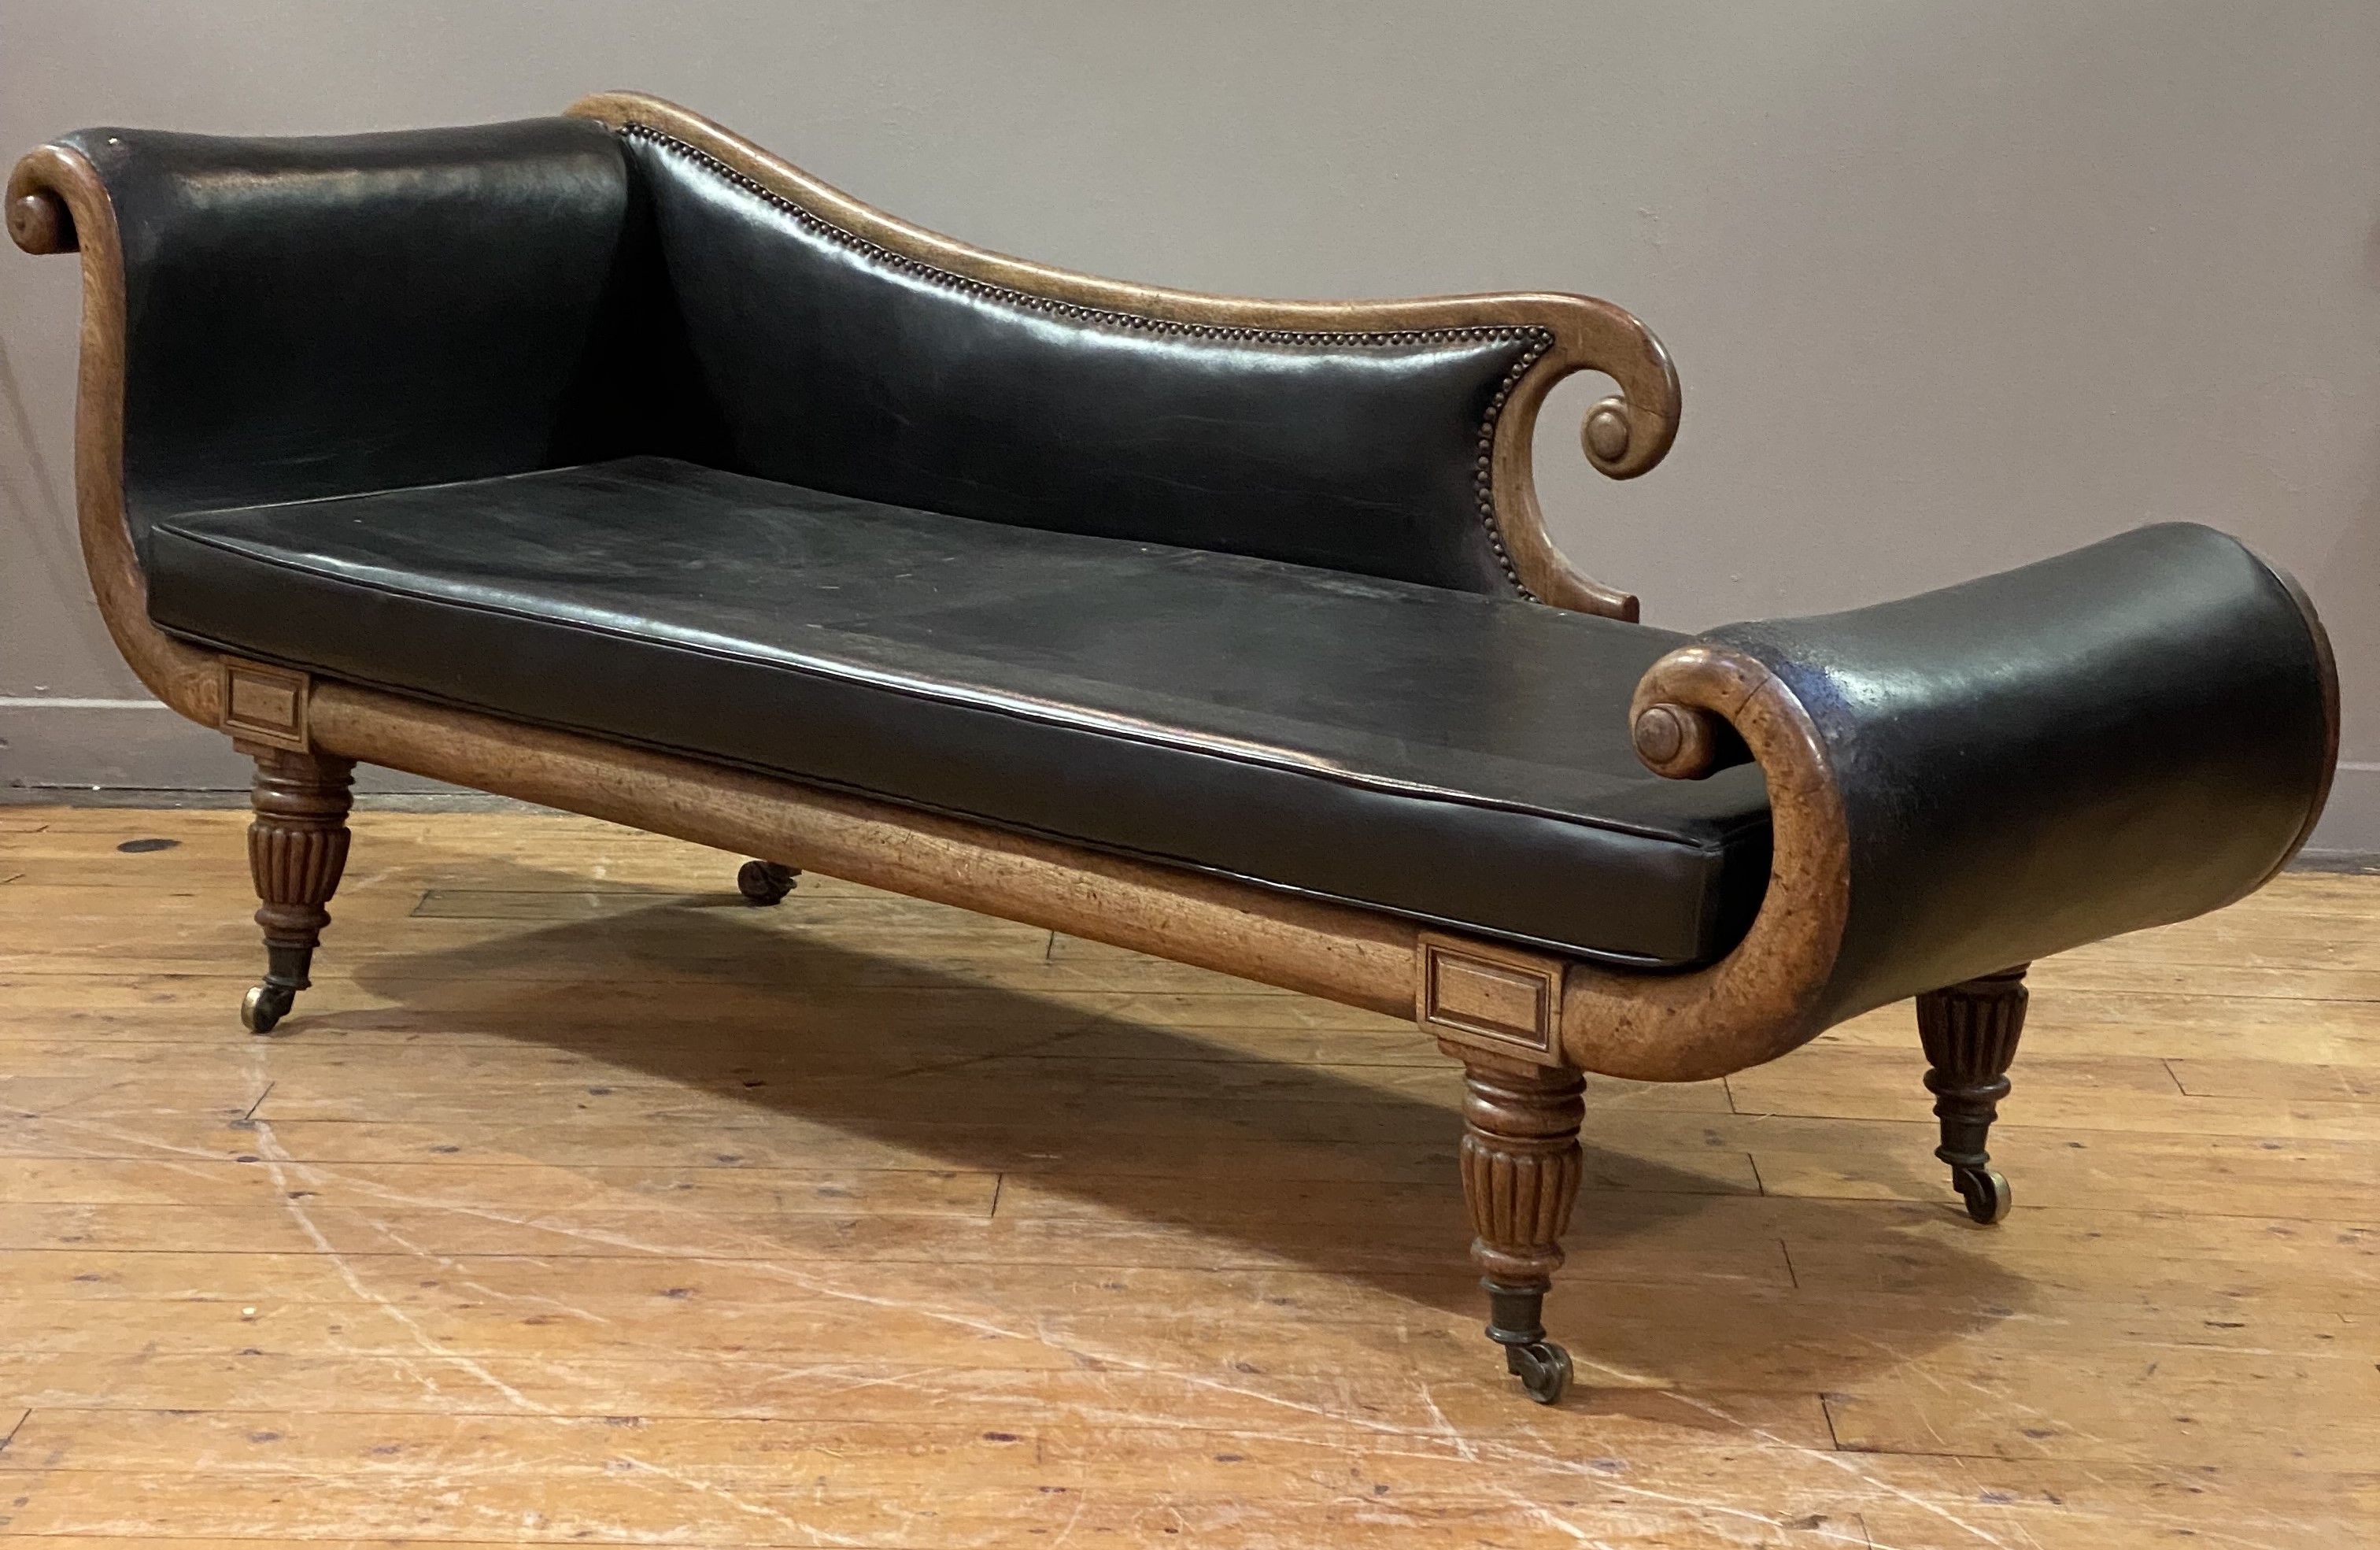 A late Regency mahogany-framed chaise longue, the scrolling show frame with squab cushion